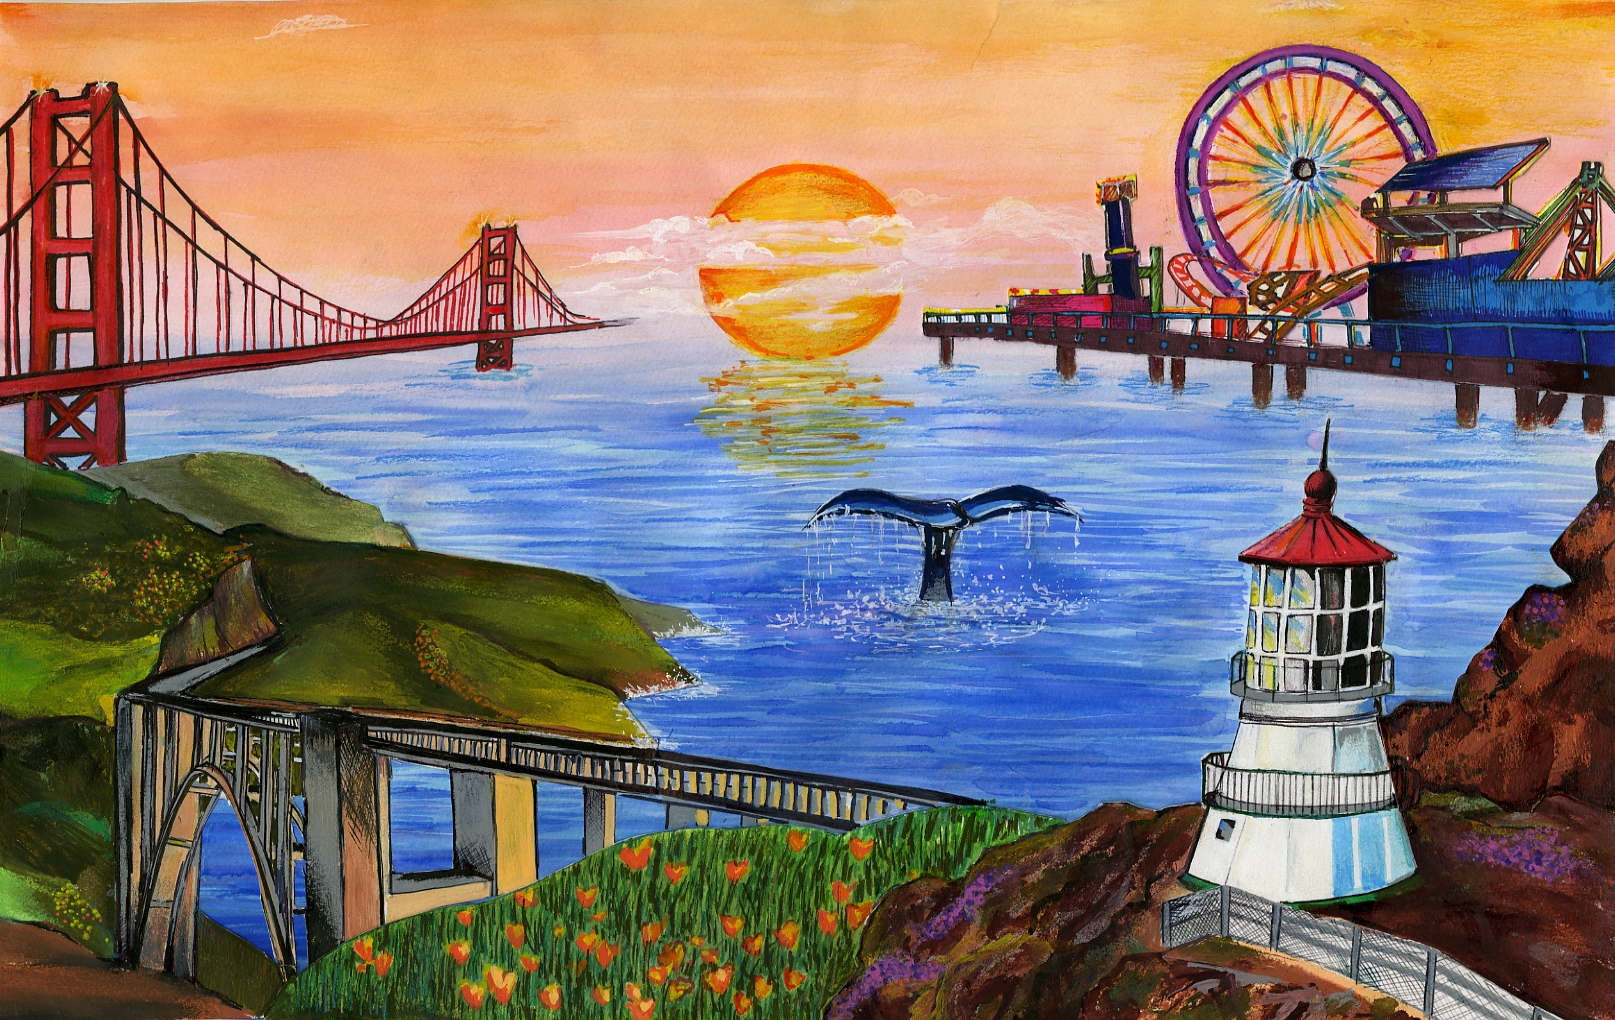 An ocean scene, composit of four locations: Golden Gate Bridge, Bixby Bridge, Point Reyes Lighthouse, and Santa Monica Pier, the sun setting in the center of the image and an whale tail showing above the water